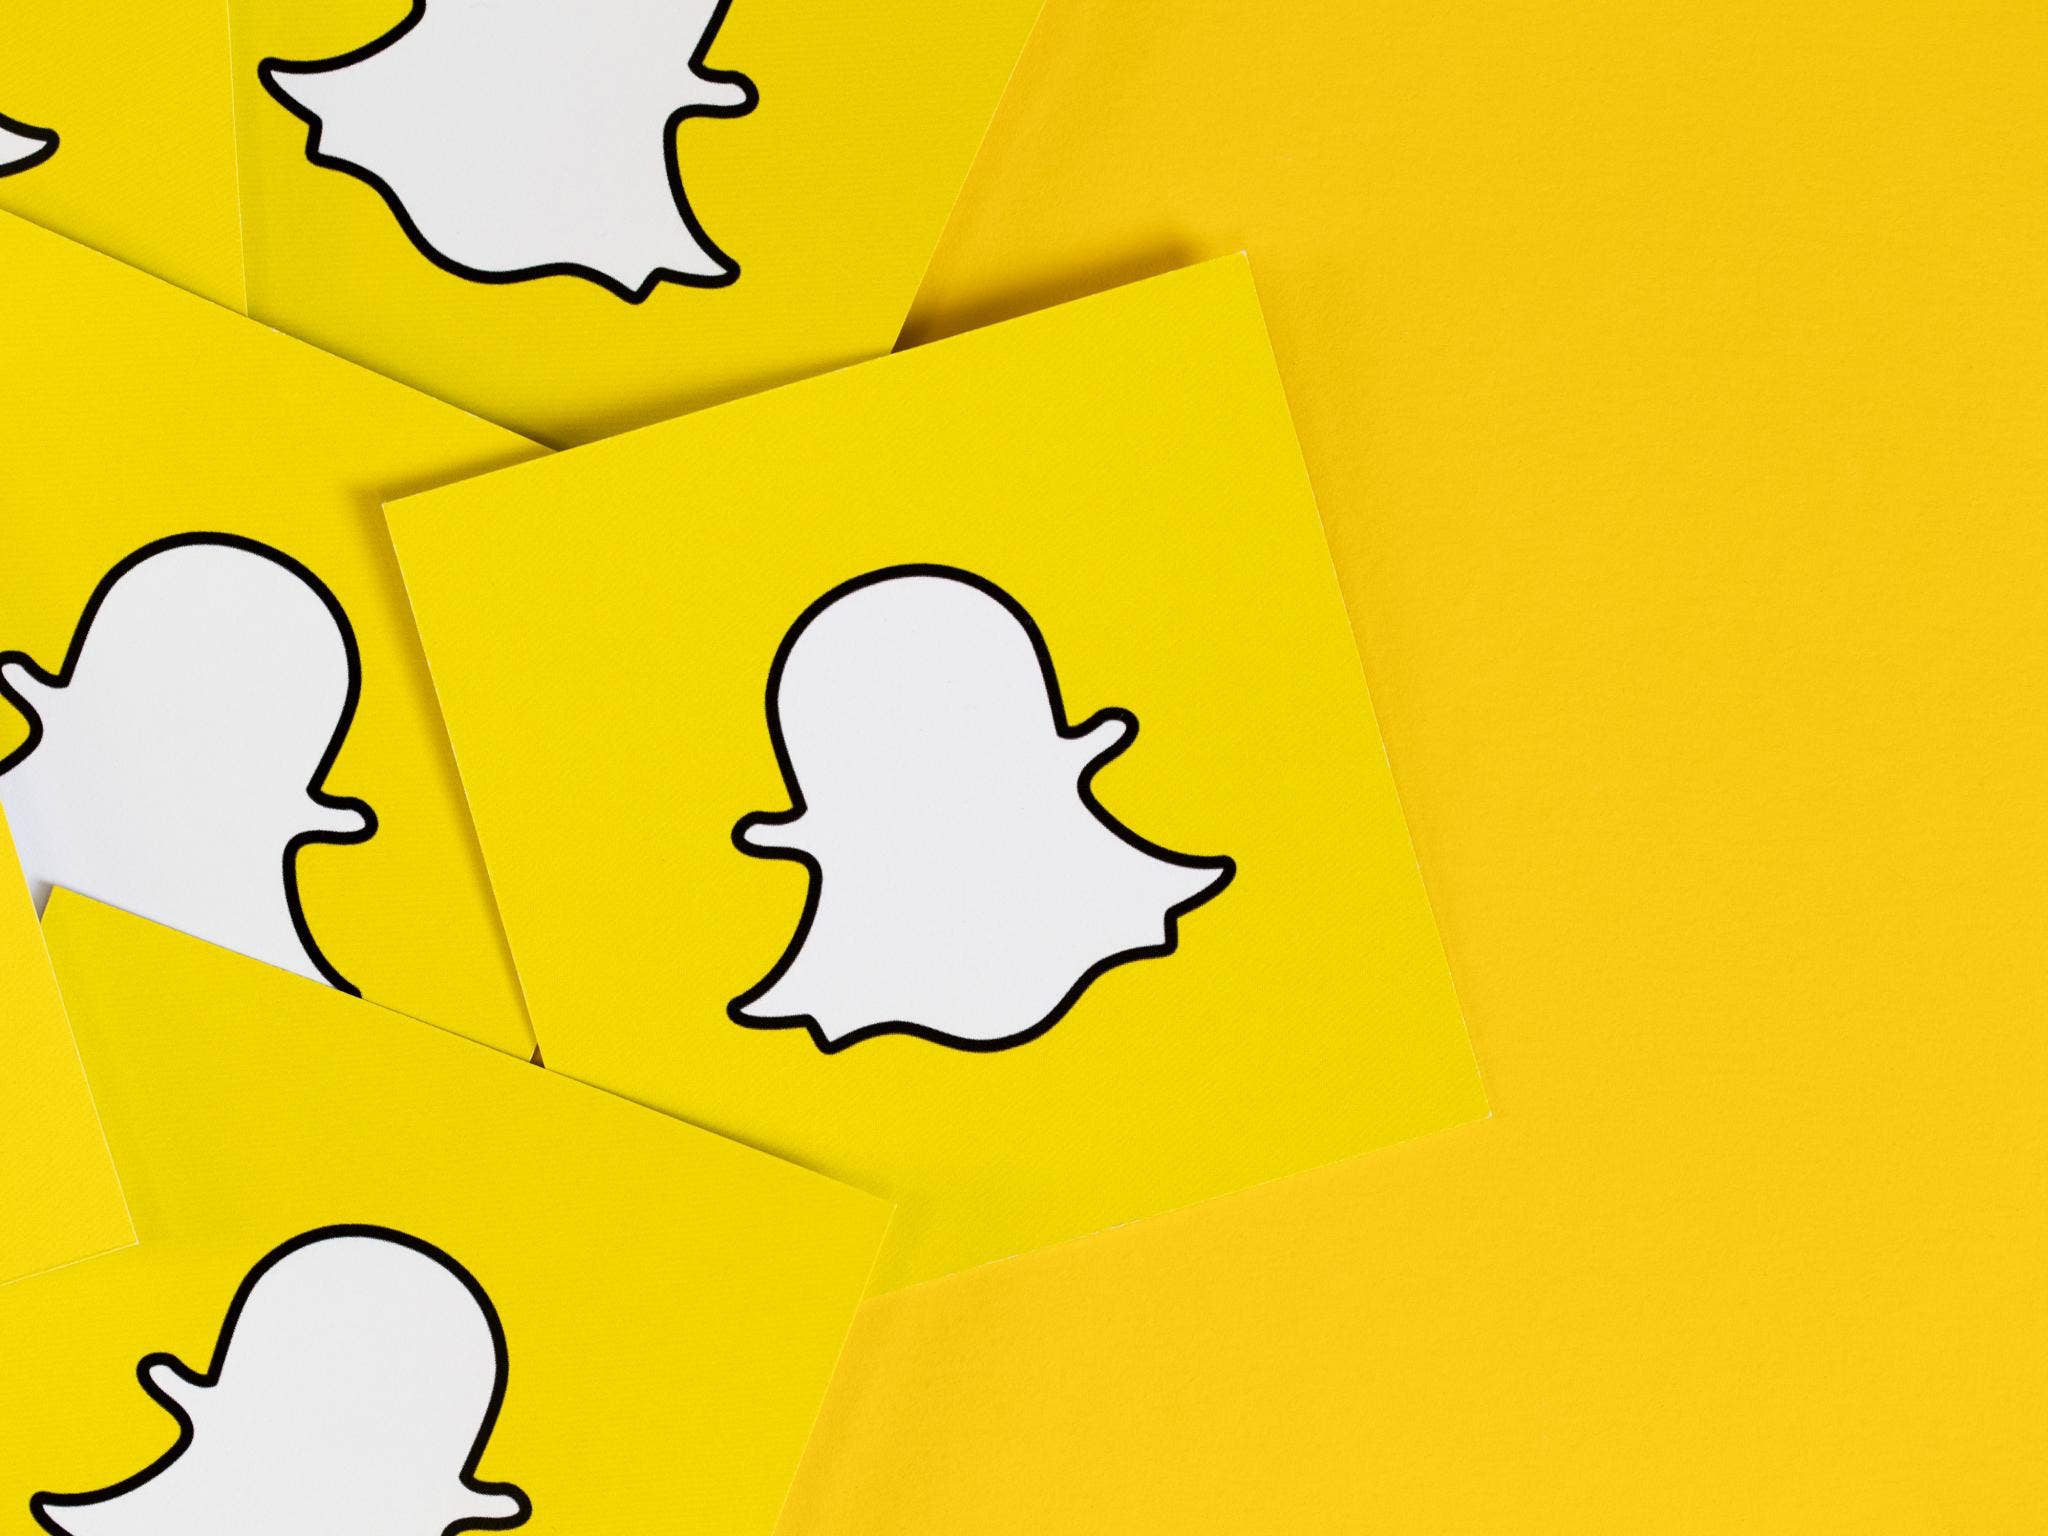 Snap Analyst Downgrades Stock, Says Earlier Thesis On Shares Posting Gains 'Compromised'